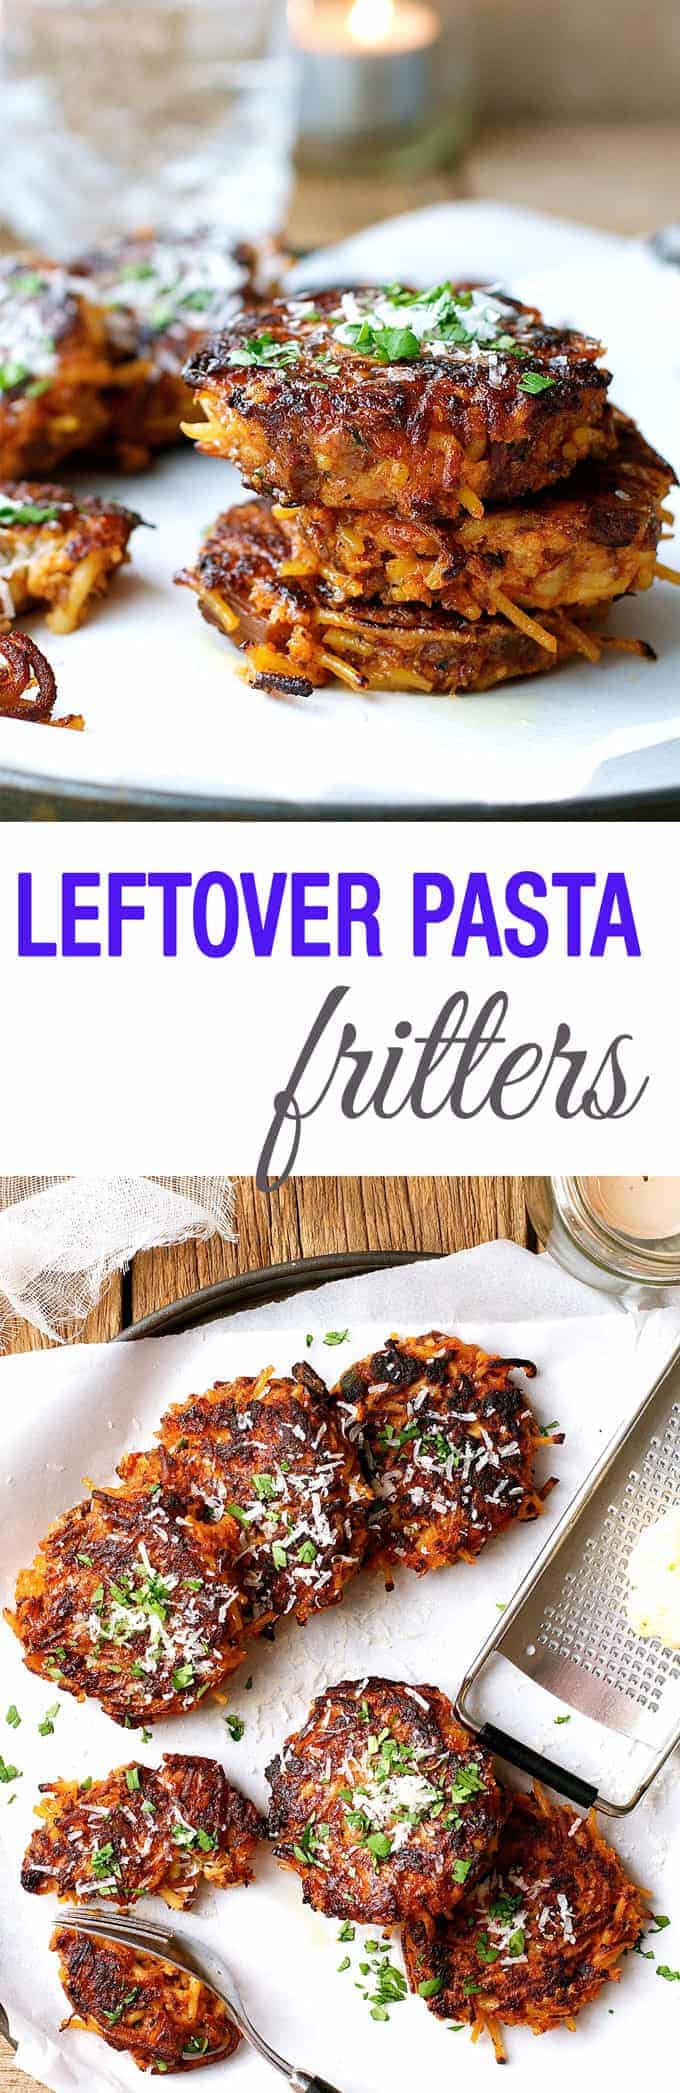 Makeover Leftover Pasta - turn them into these incredible fritters with just eggs, breadcrumbs and a bit of cheese! Can be made with any leftover pasta.